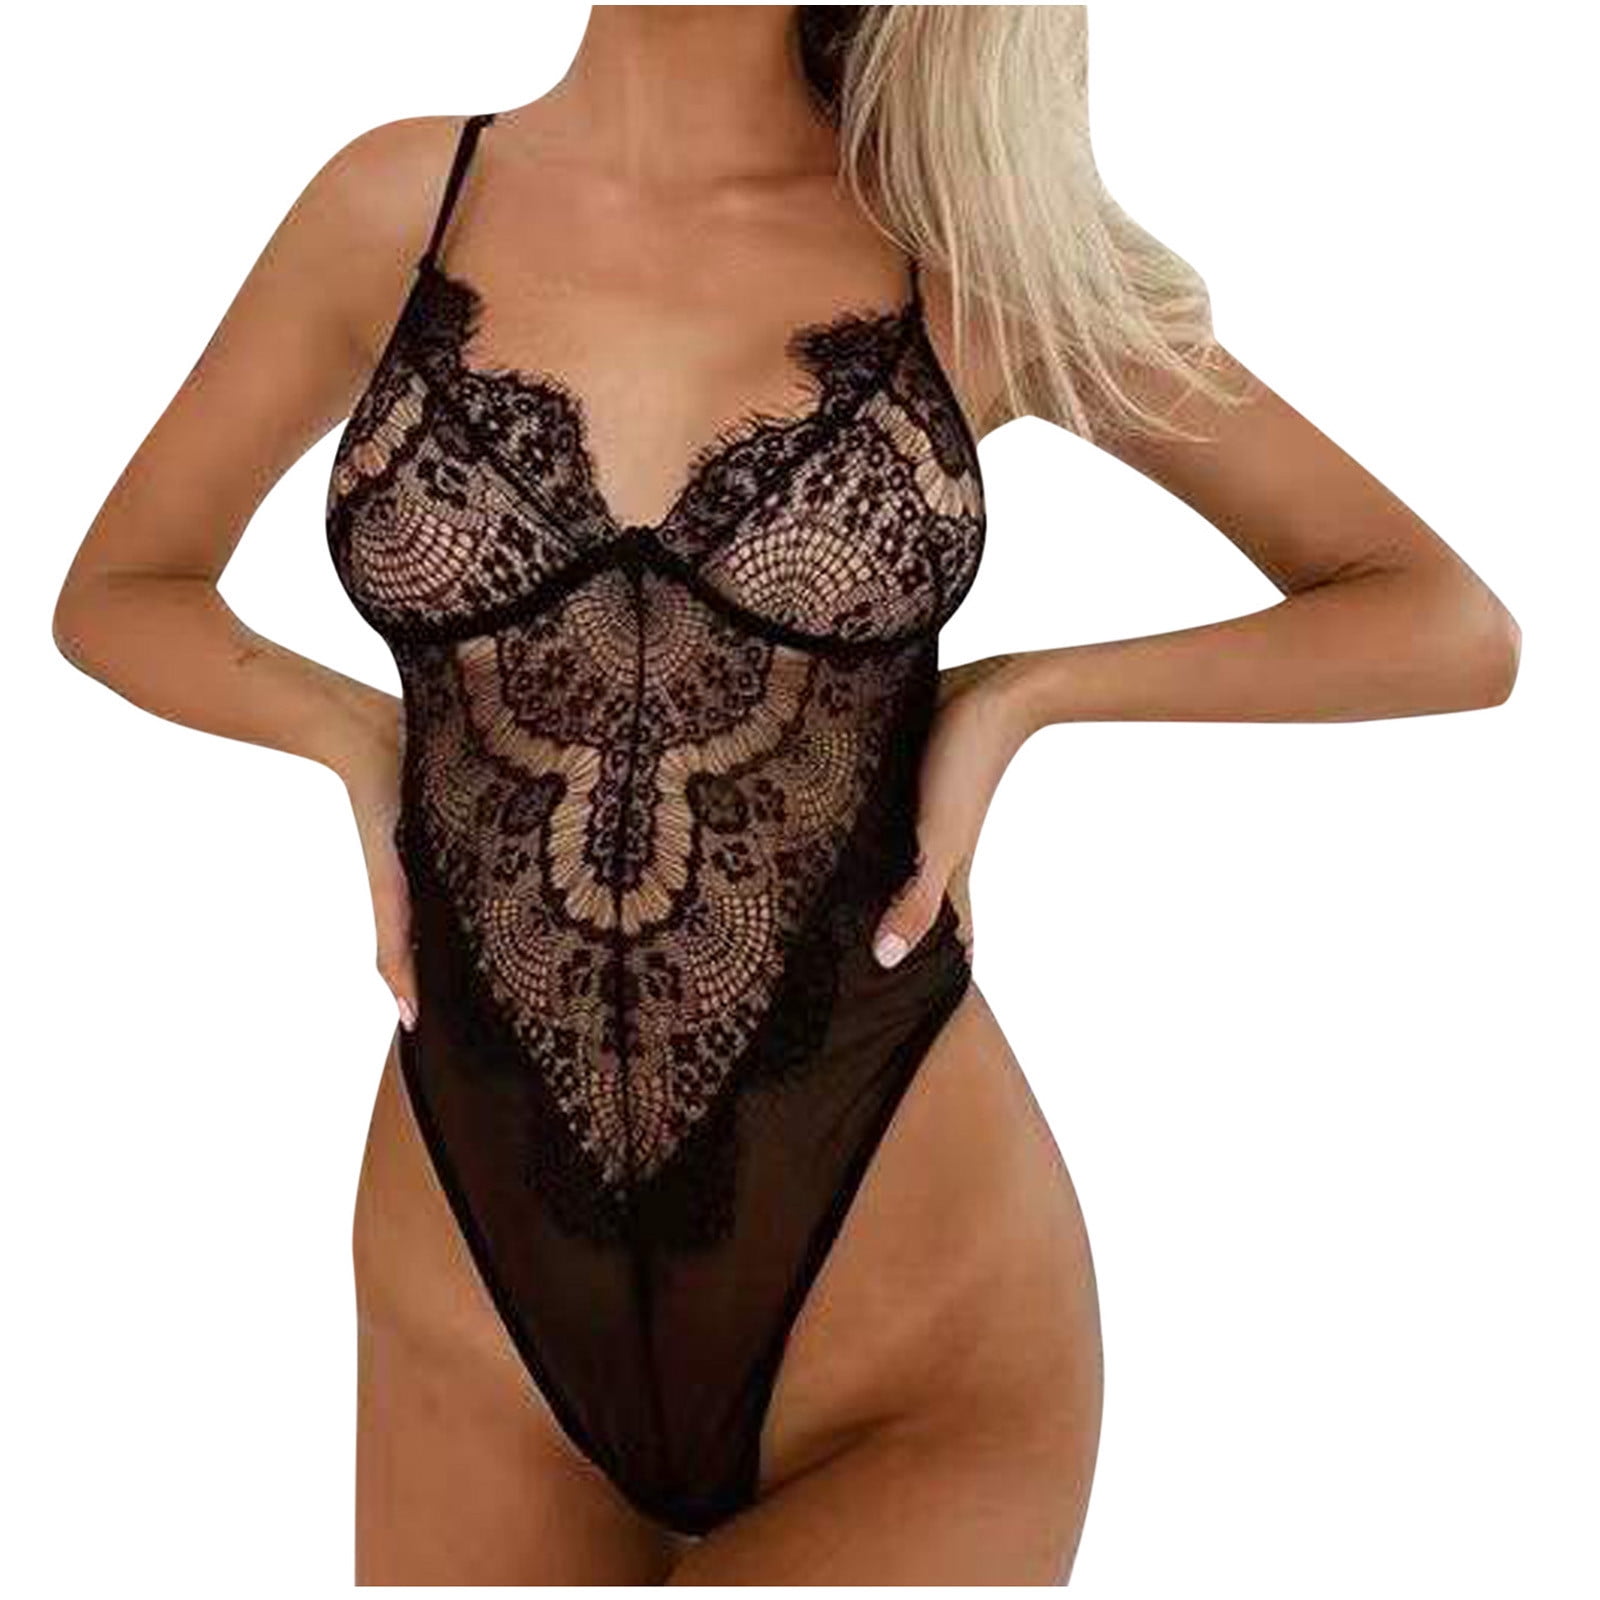 Womens Cutout Strappy Lingerie 2-Piece Lingerie Set with Body/Ouvert Body  and Sat Deep V Teddy Deep V Halter Deep V Halter Cut Out Panty Lingerie Set  Push Up Strappy Bra and Panty